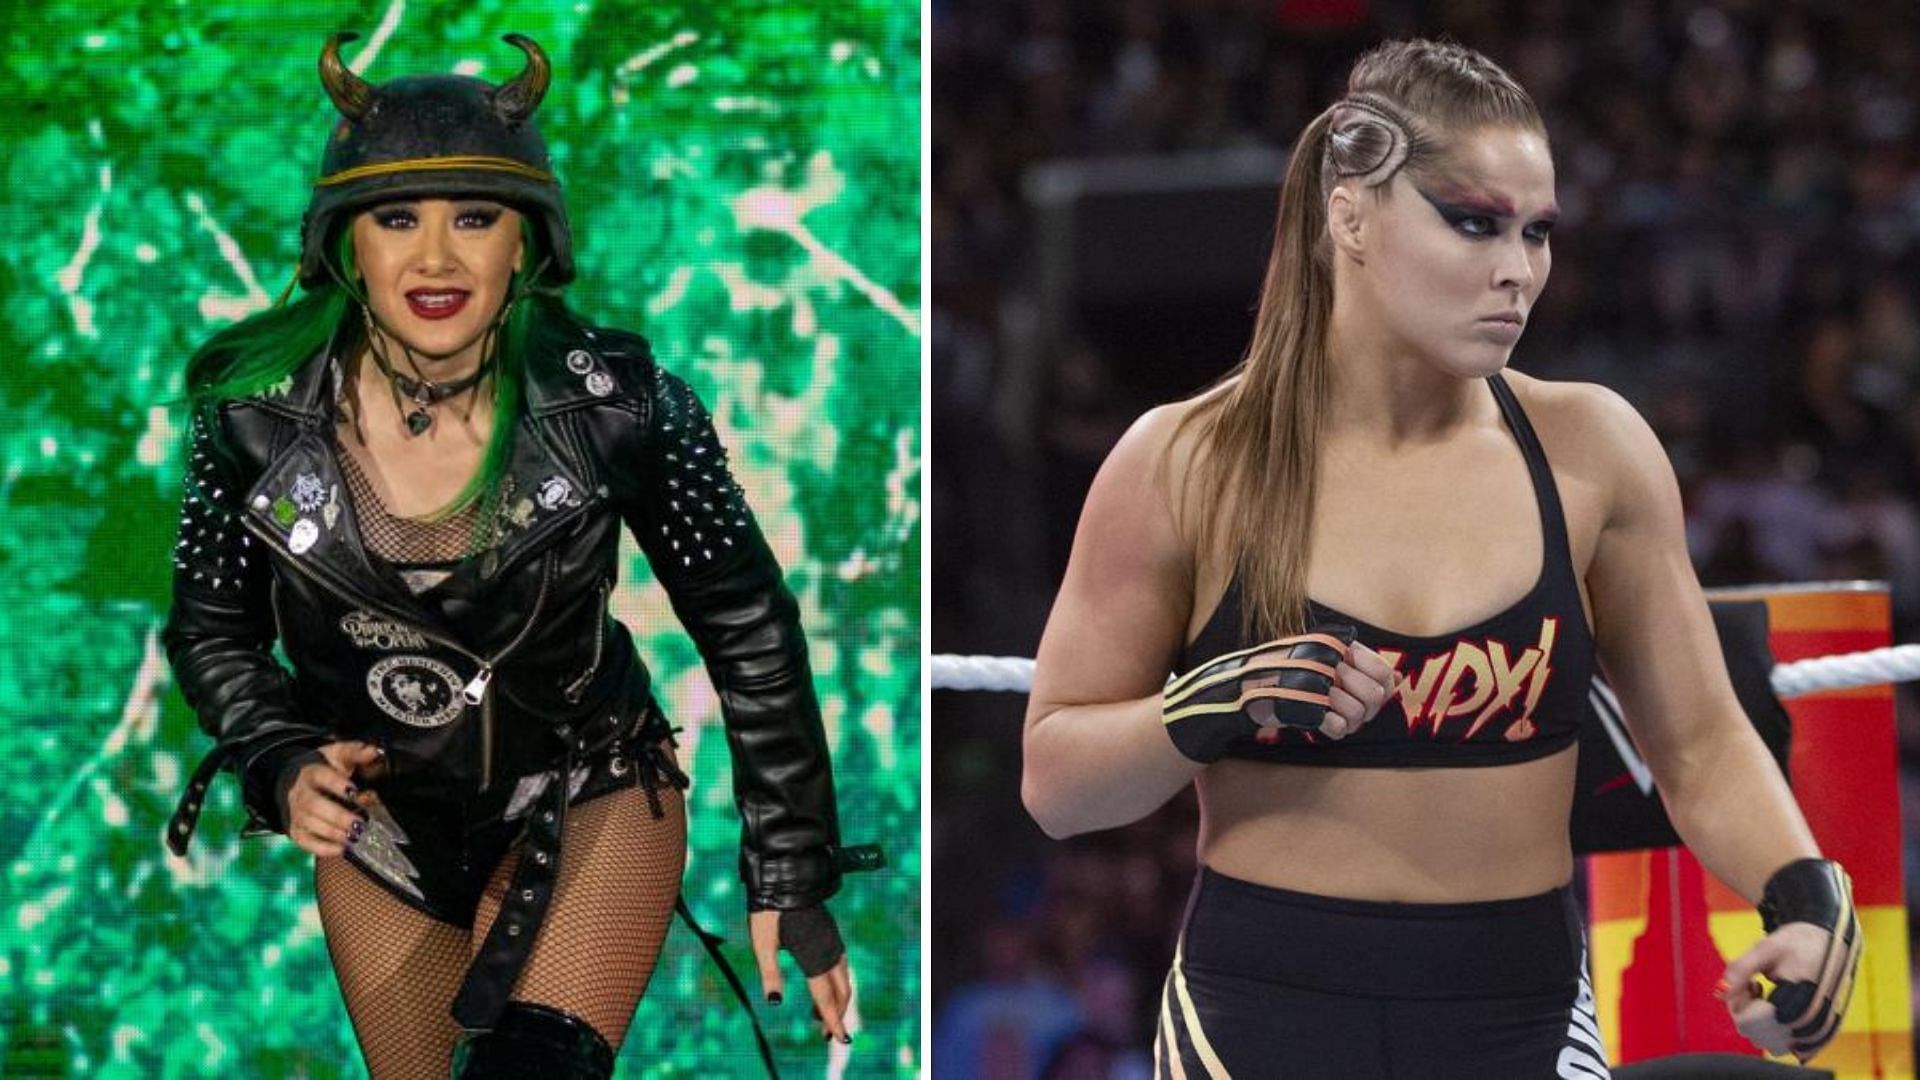 Shotzi faced Ronda Rousey two weeks ago on SmackDown